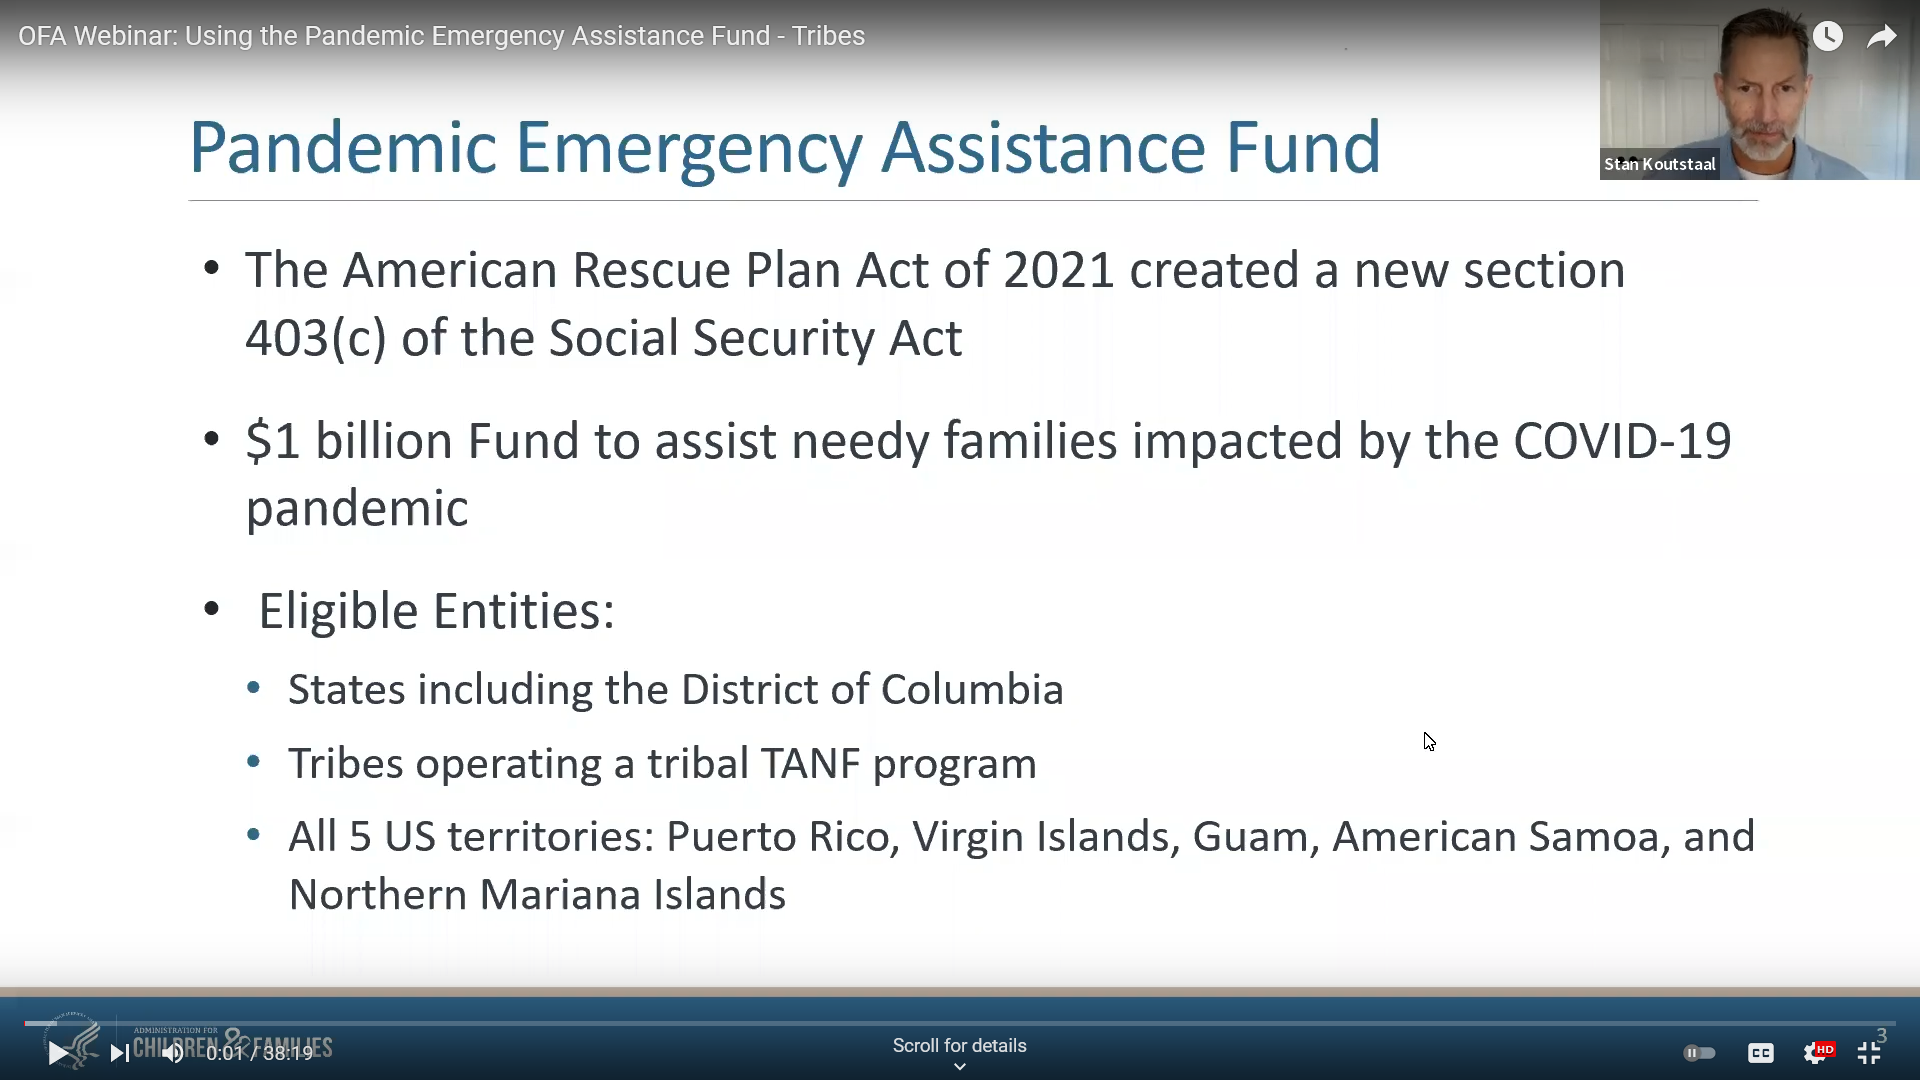 OFA Webinar: Using the Pandemic Emergency Assistance Fund - Tribes - YouTube